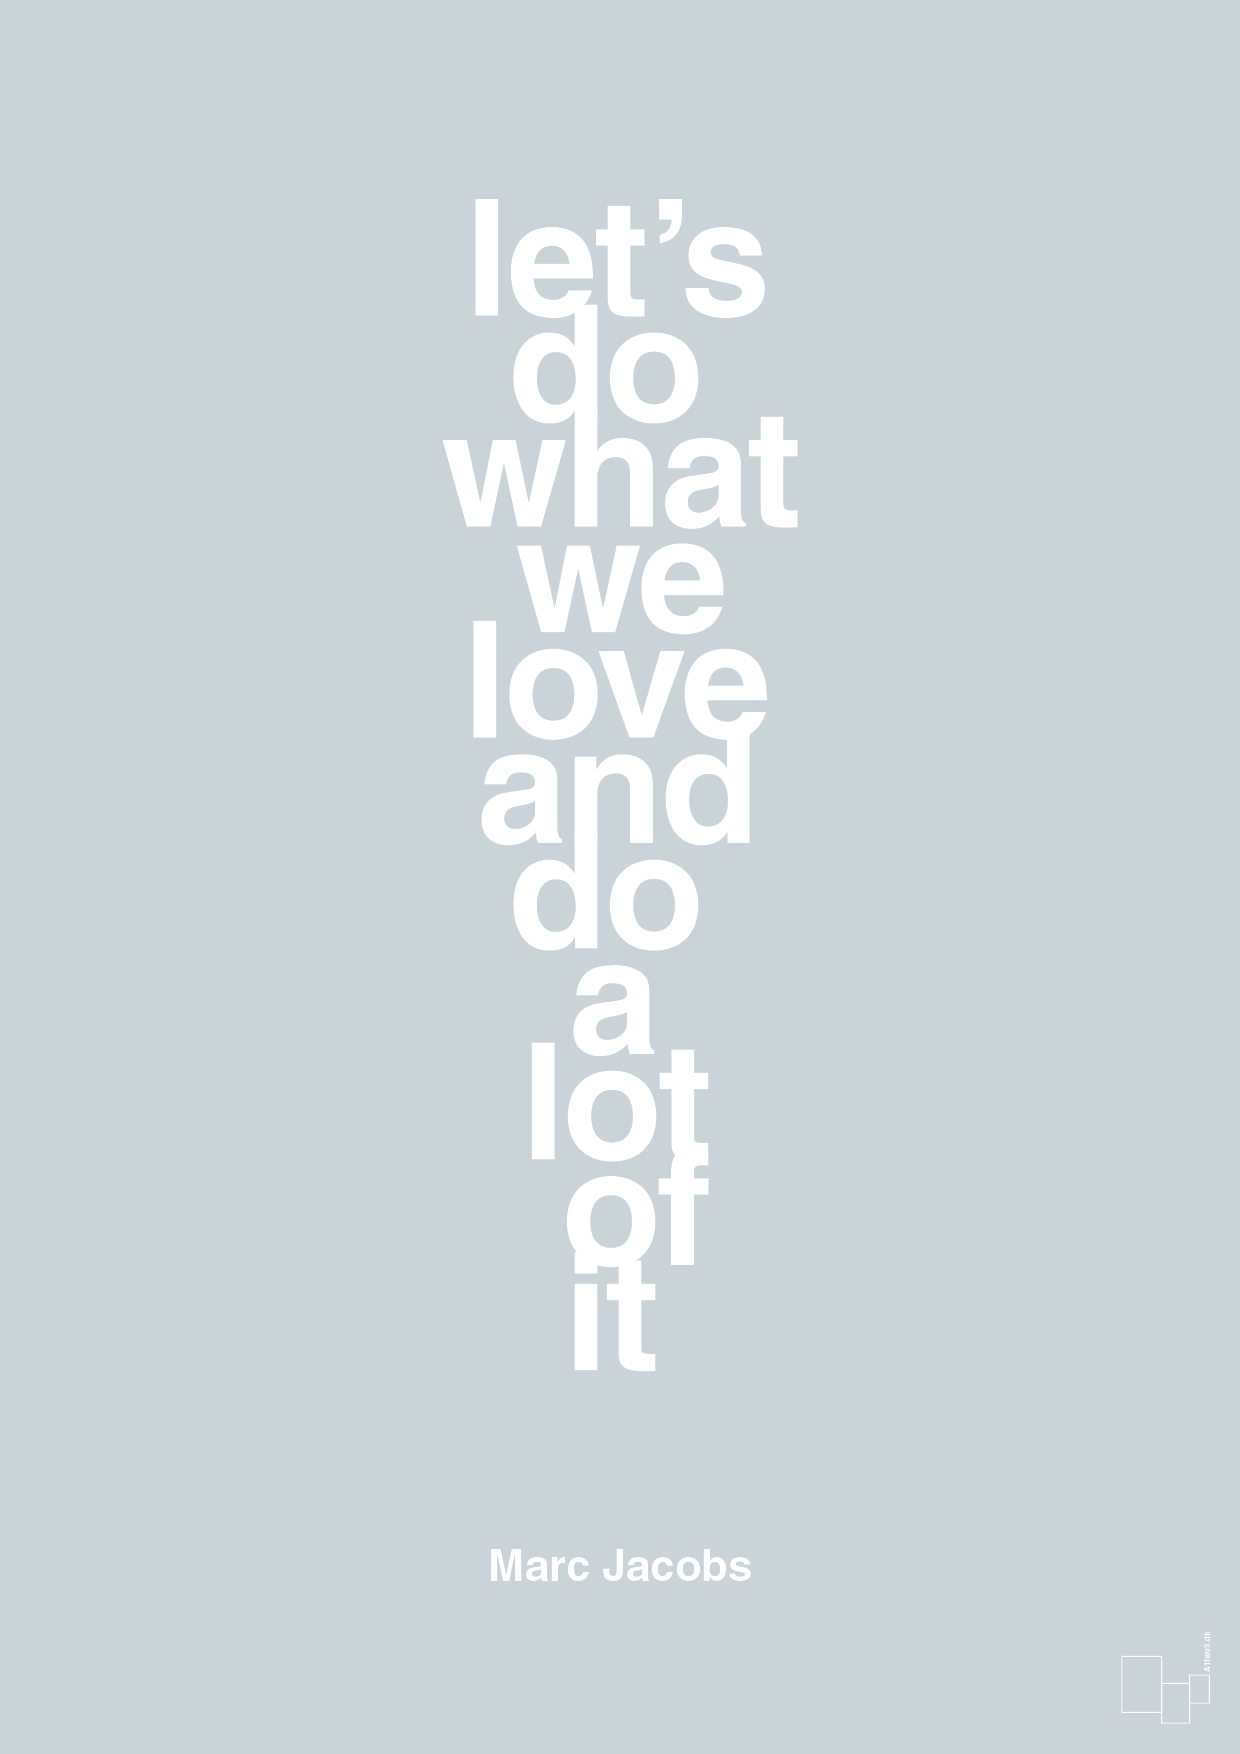 lets do what we love and do a lot of it - Plakat med Citater i Light Drizzle